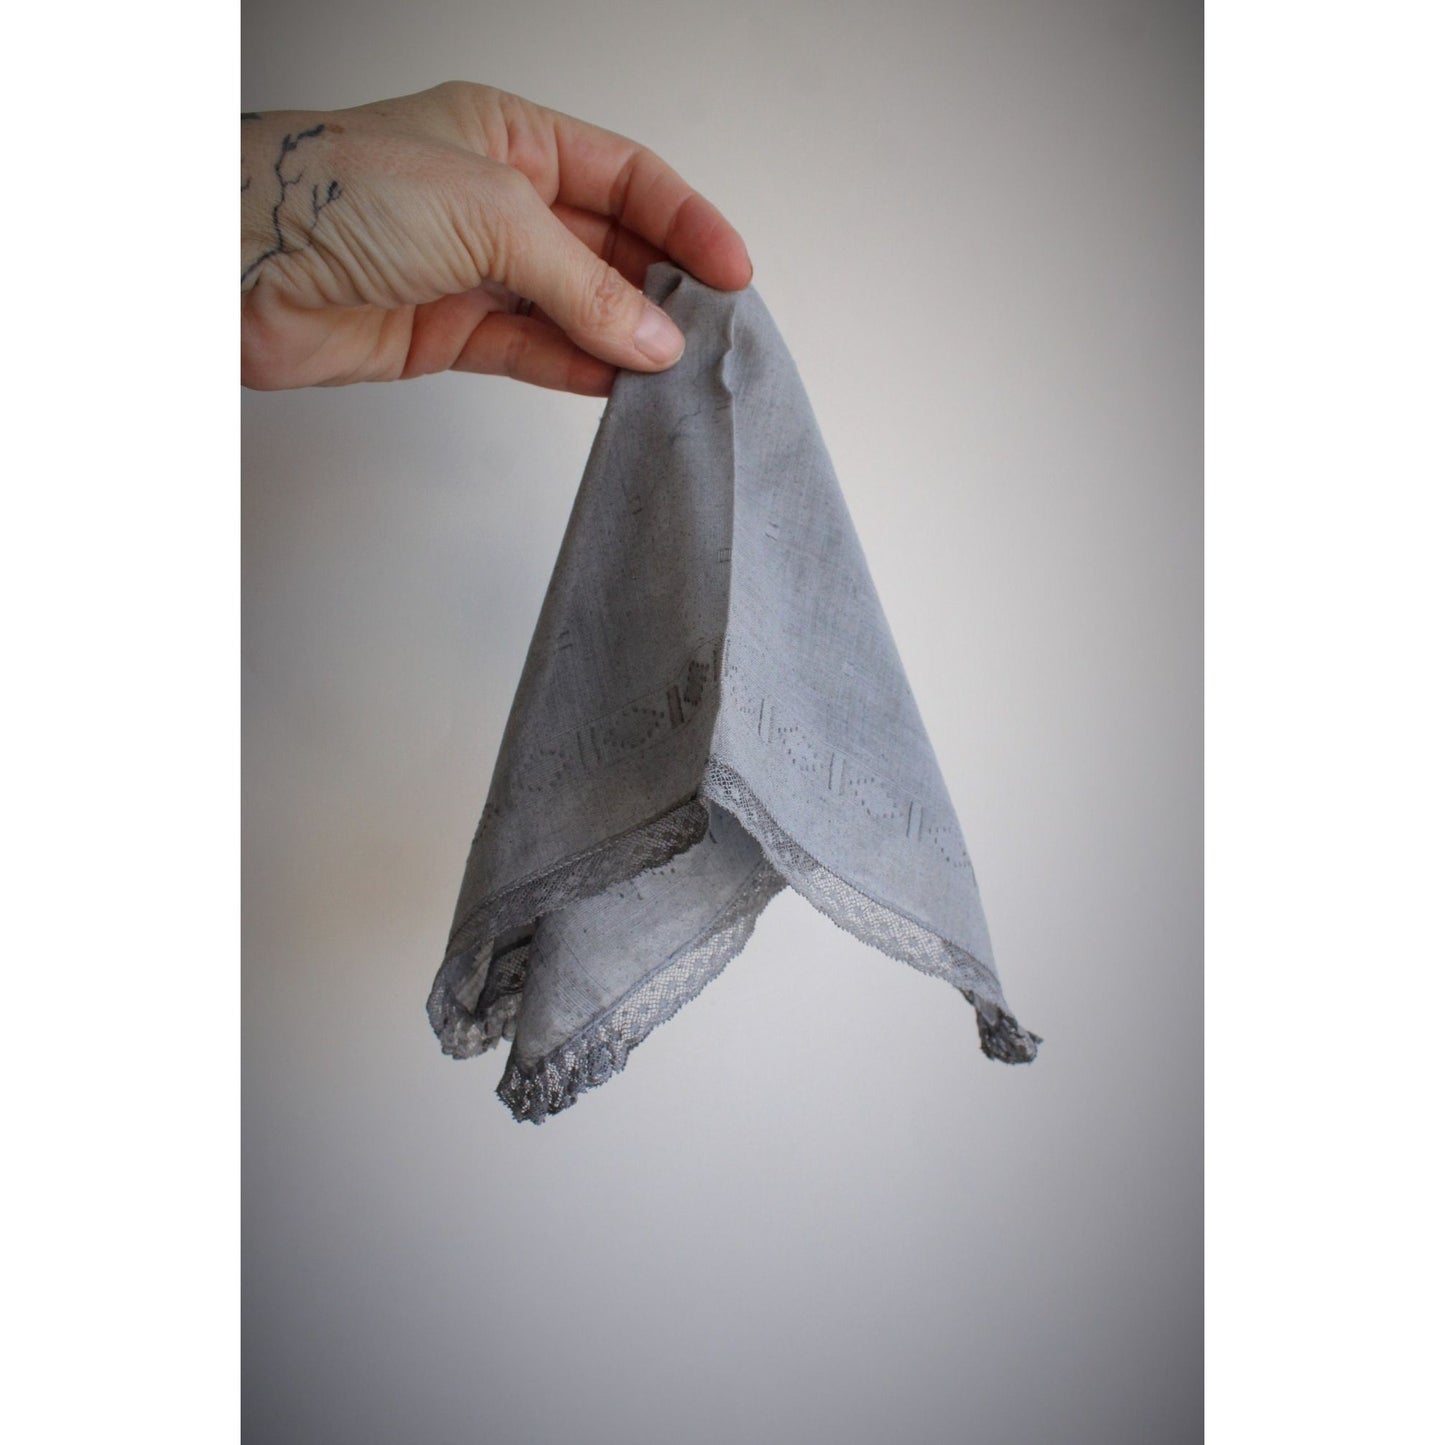 Hand Plant Dyed Blue Gray Handkerchief with Lace Trim